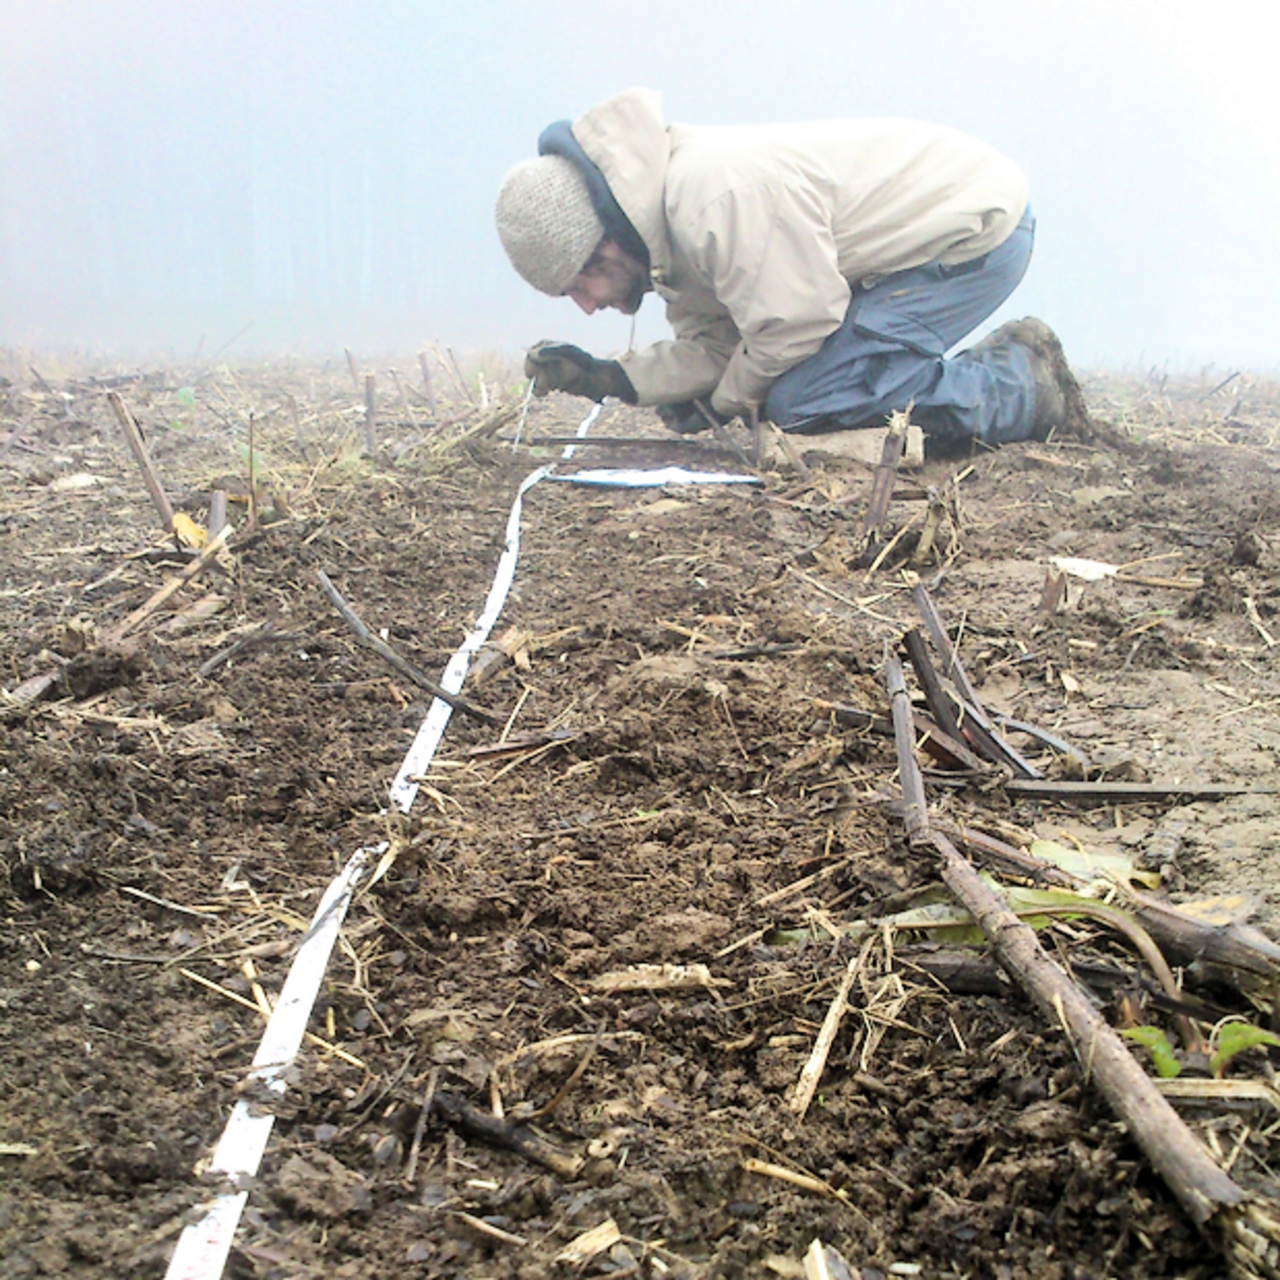 Monitoring of earthworm casts along a transect in a cup plant field